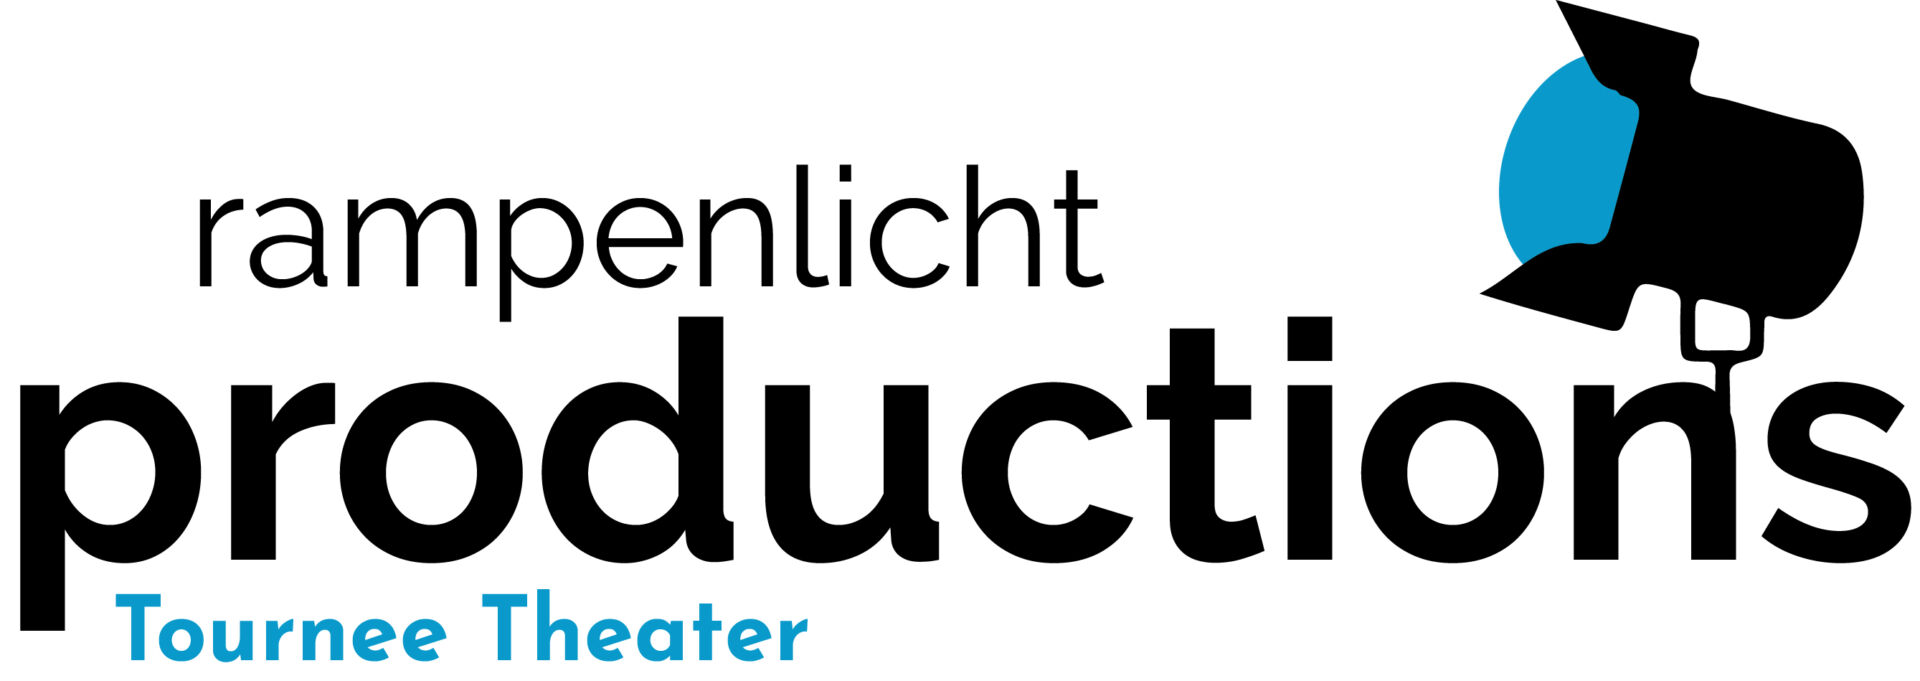 (c) Rampenlicht-productions.at